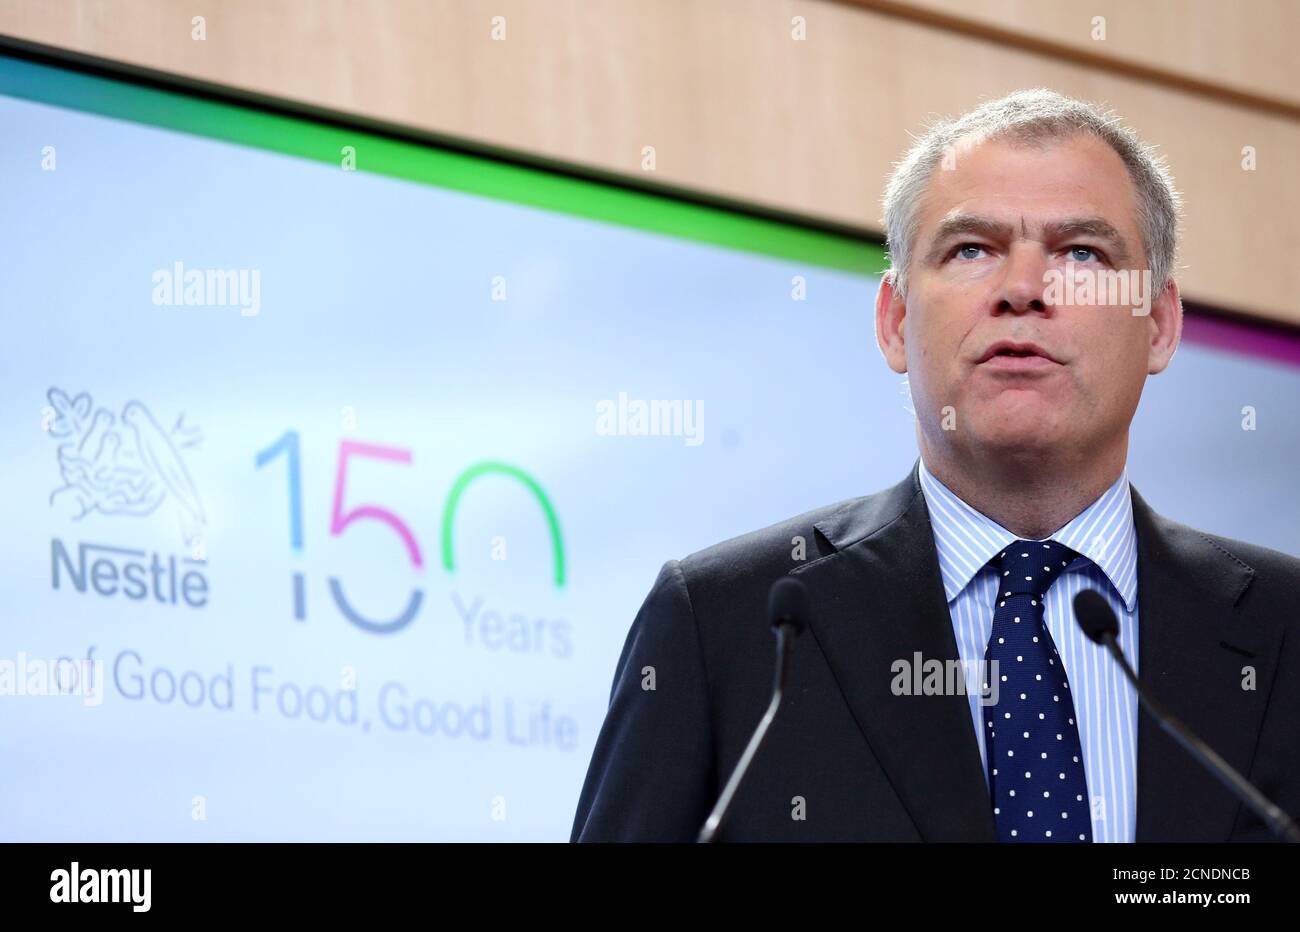 Robin Tickle Nestle Head of Corporate Media Relations addresses a news  conference at the world food giant in Vevey, Switzerland, October 20, 2016.  REUTERS/Denis Balibouse Photo Stock - Alamy